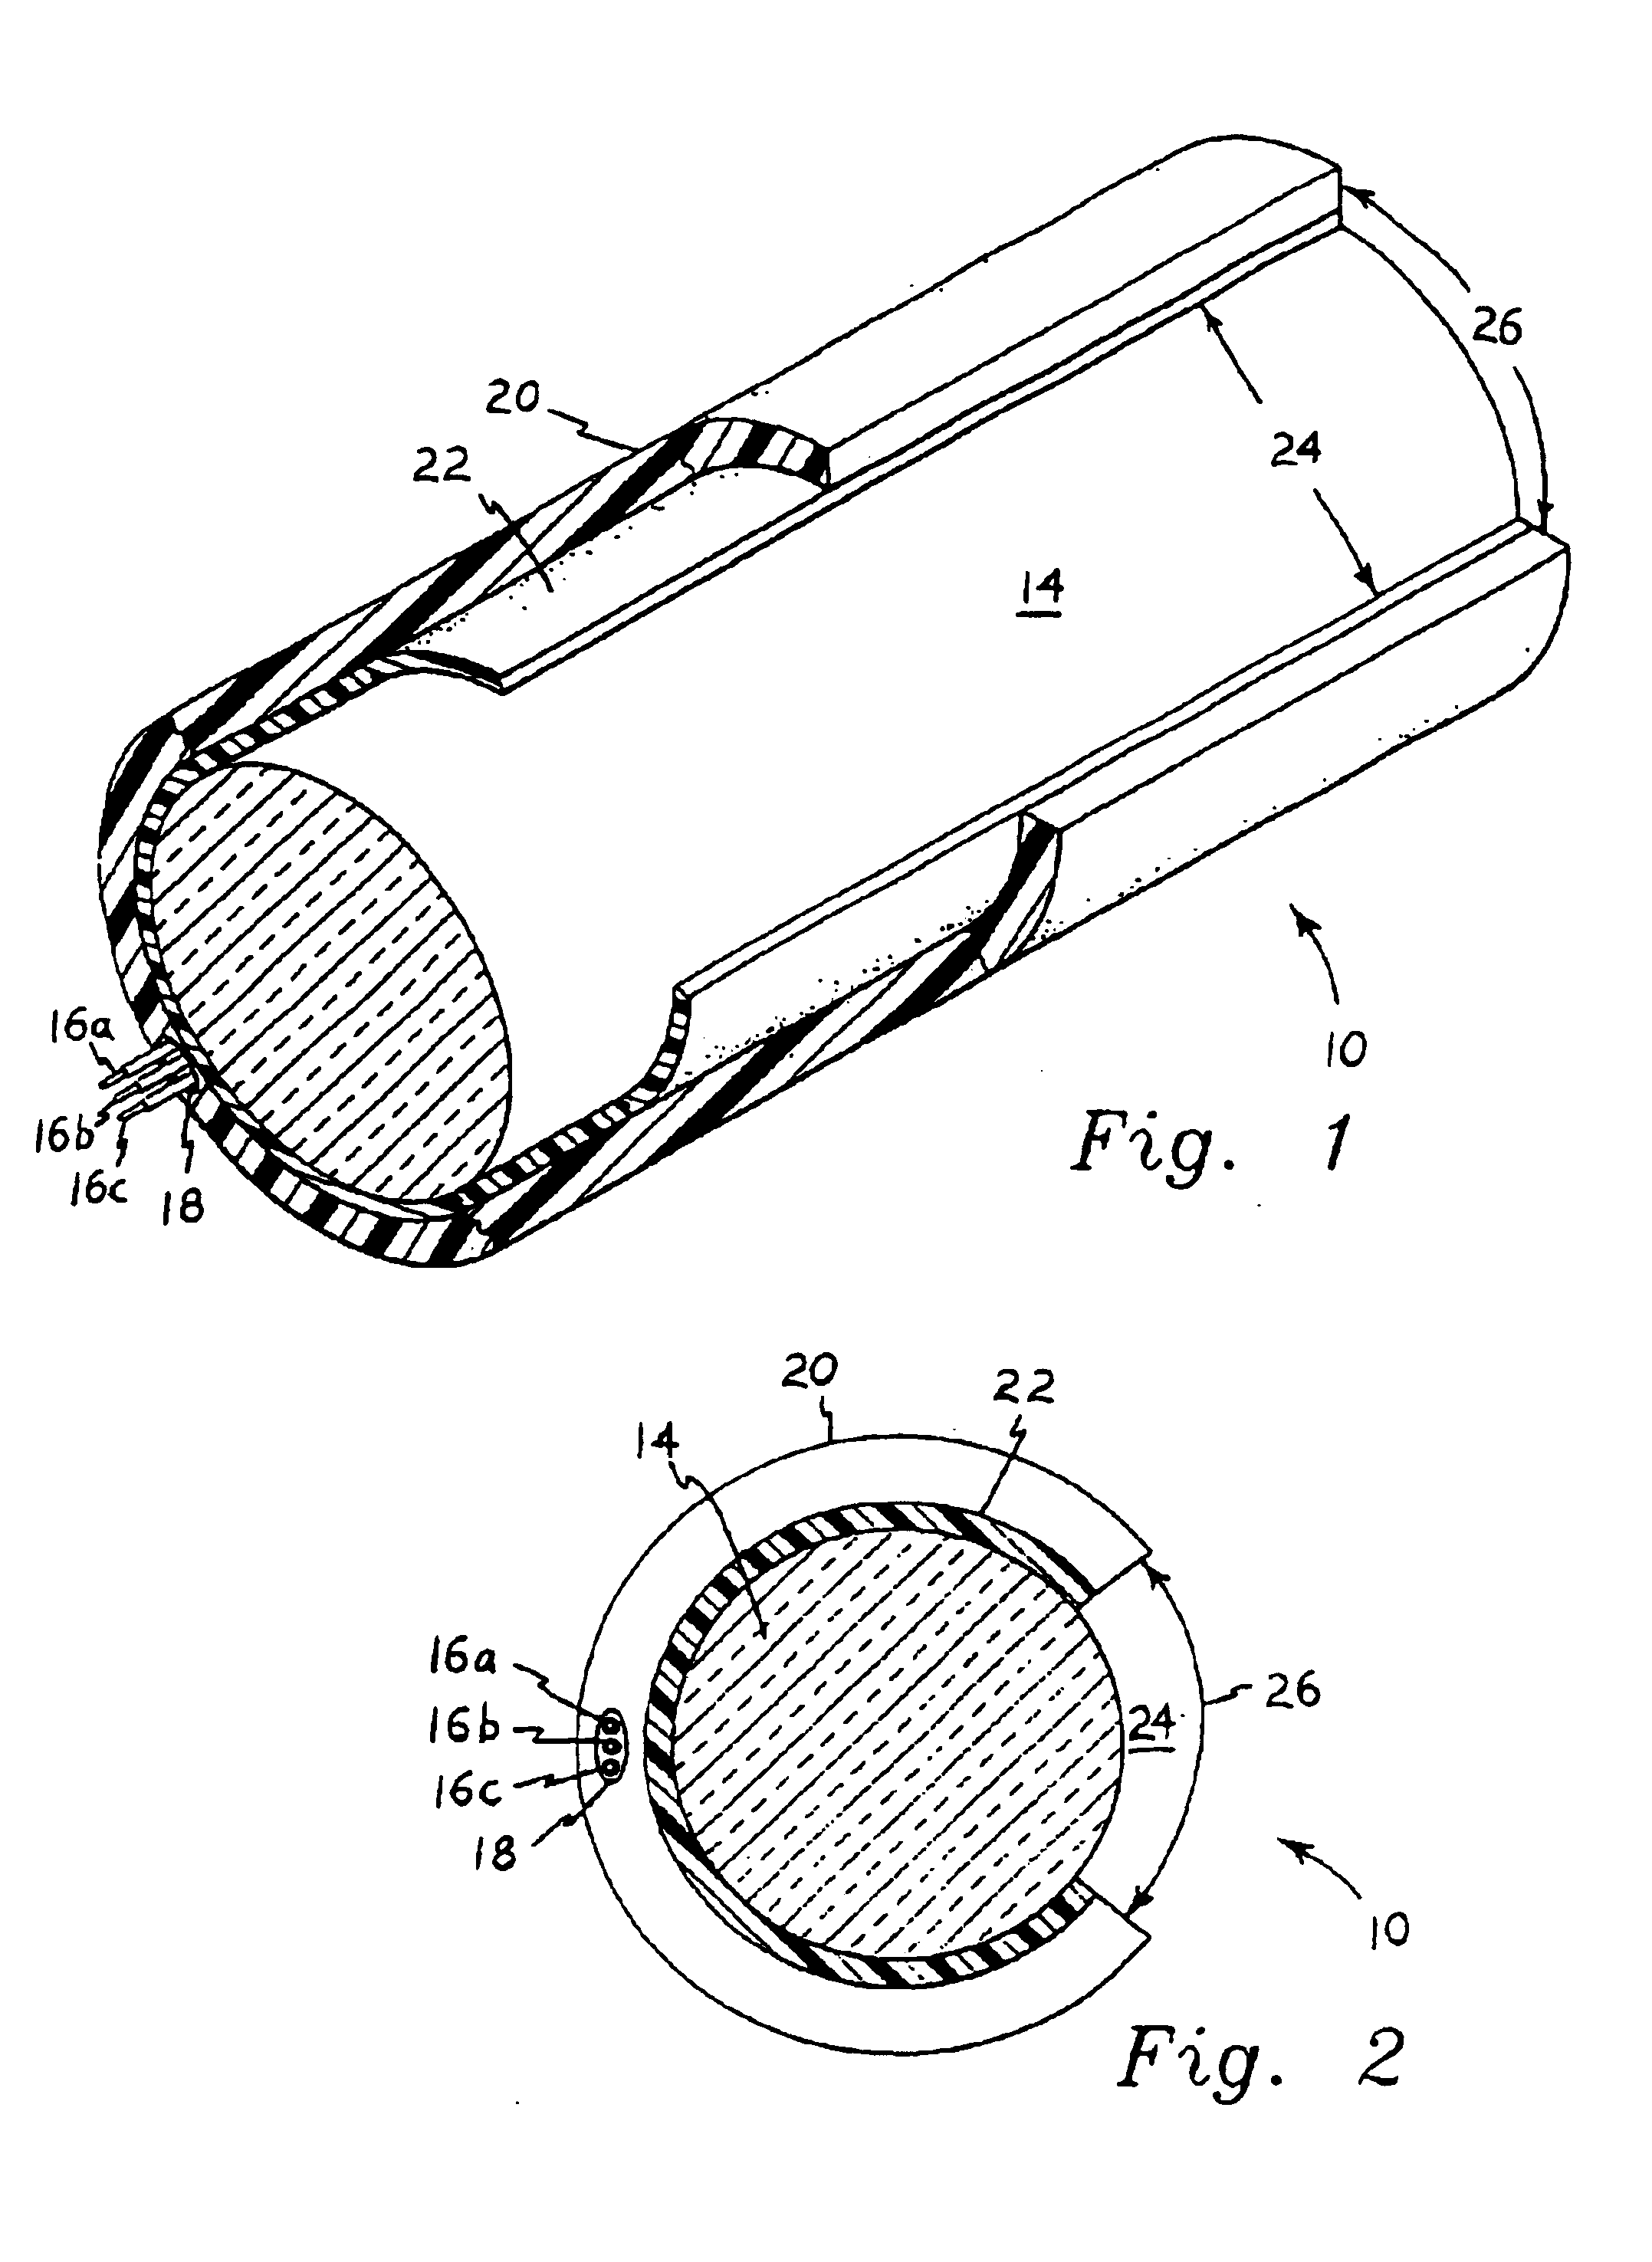 Compound optical and electrical conductors, and connectors therefor